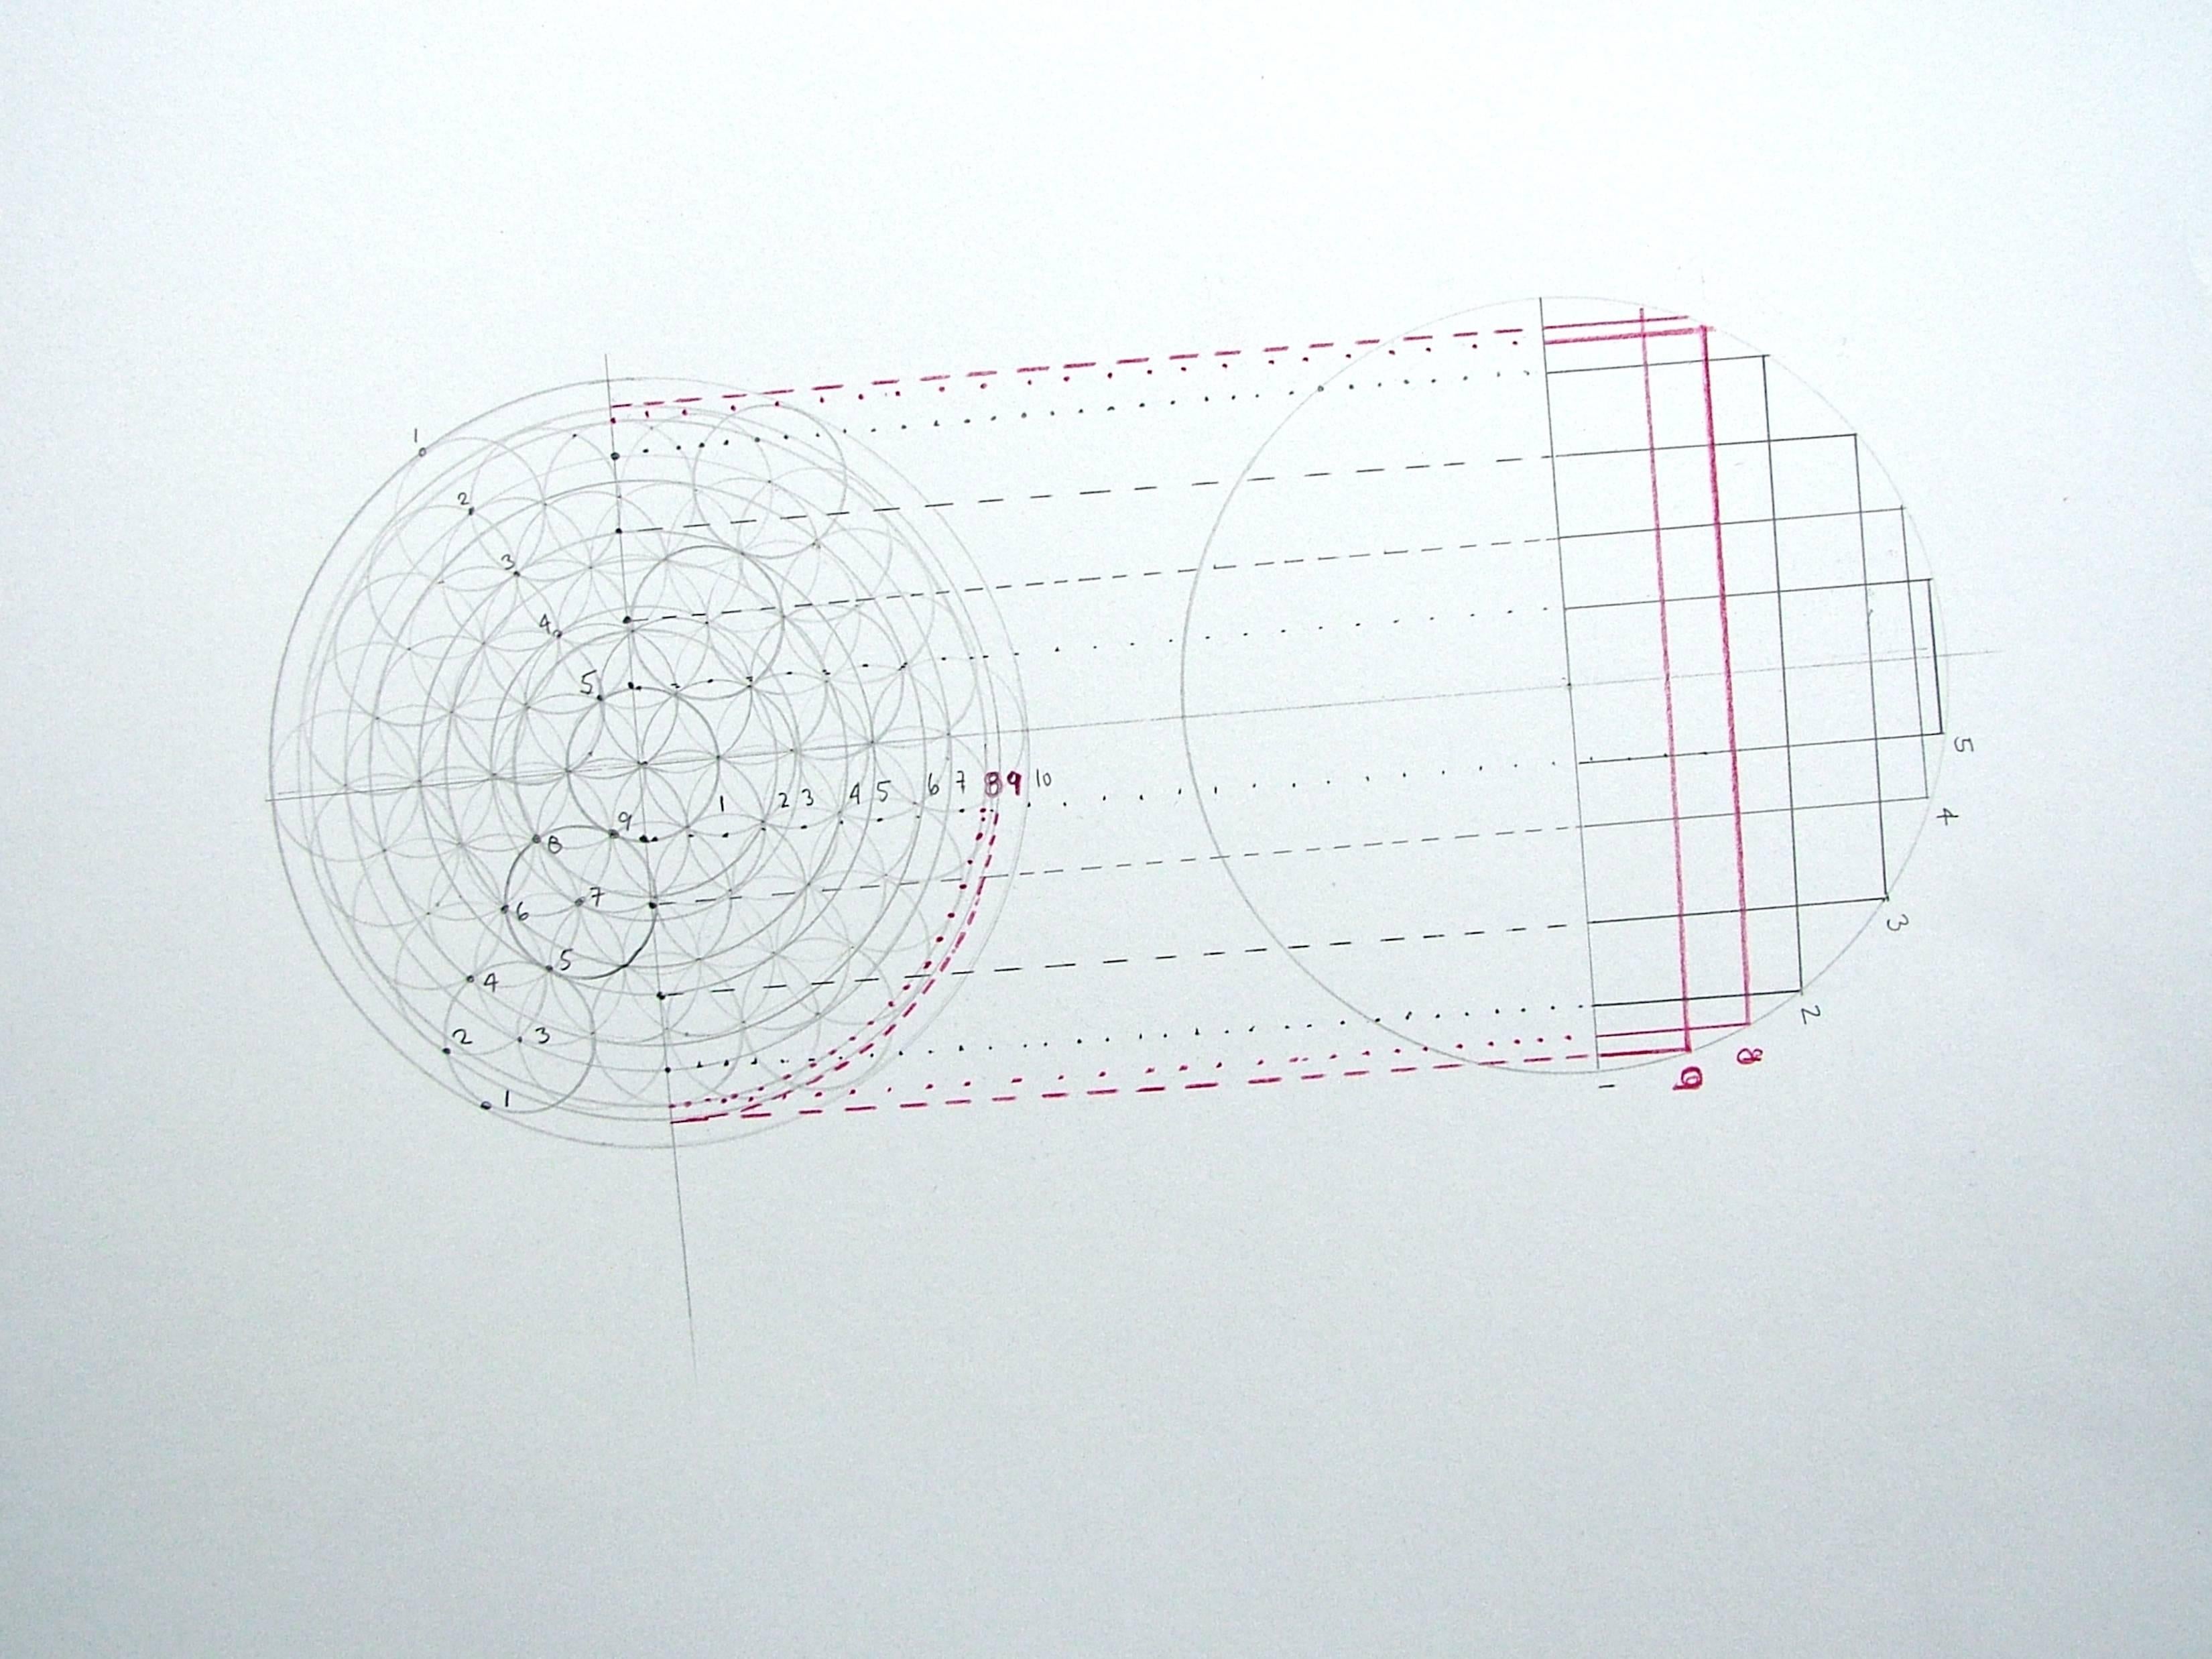 Brigitte Parusel's works are underlined by an emphasis on experimentation and her interest in working within the limitations of a system.

Her drawings are part of an ongoing exploration of a geometric pattern of interconnected circles. The